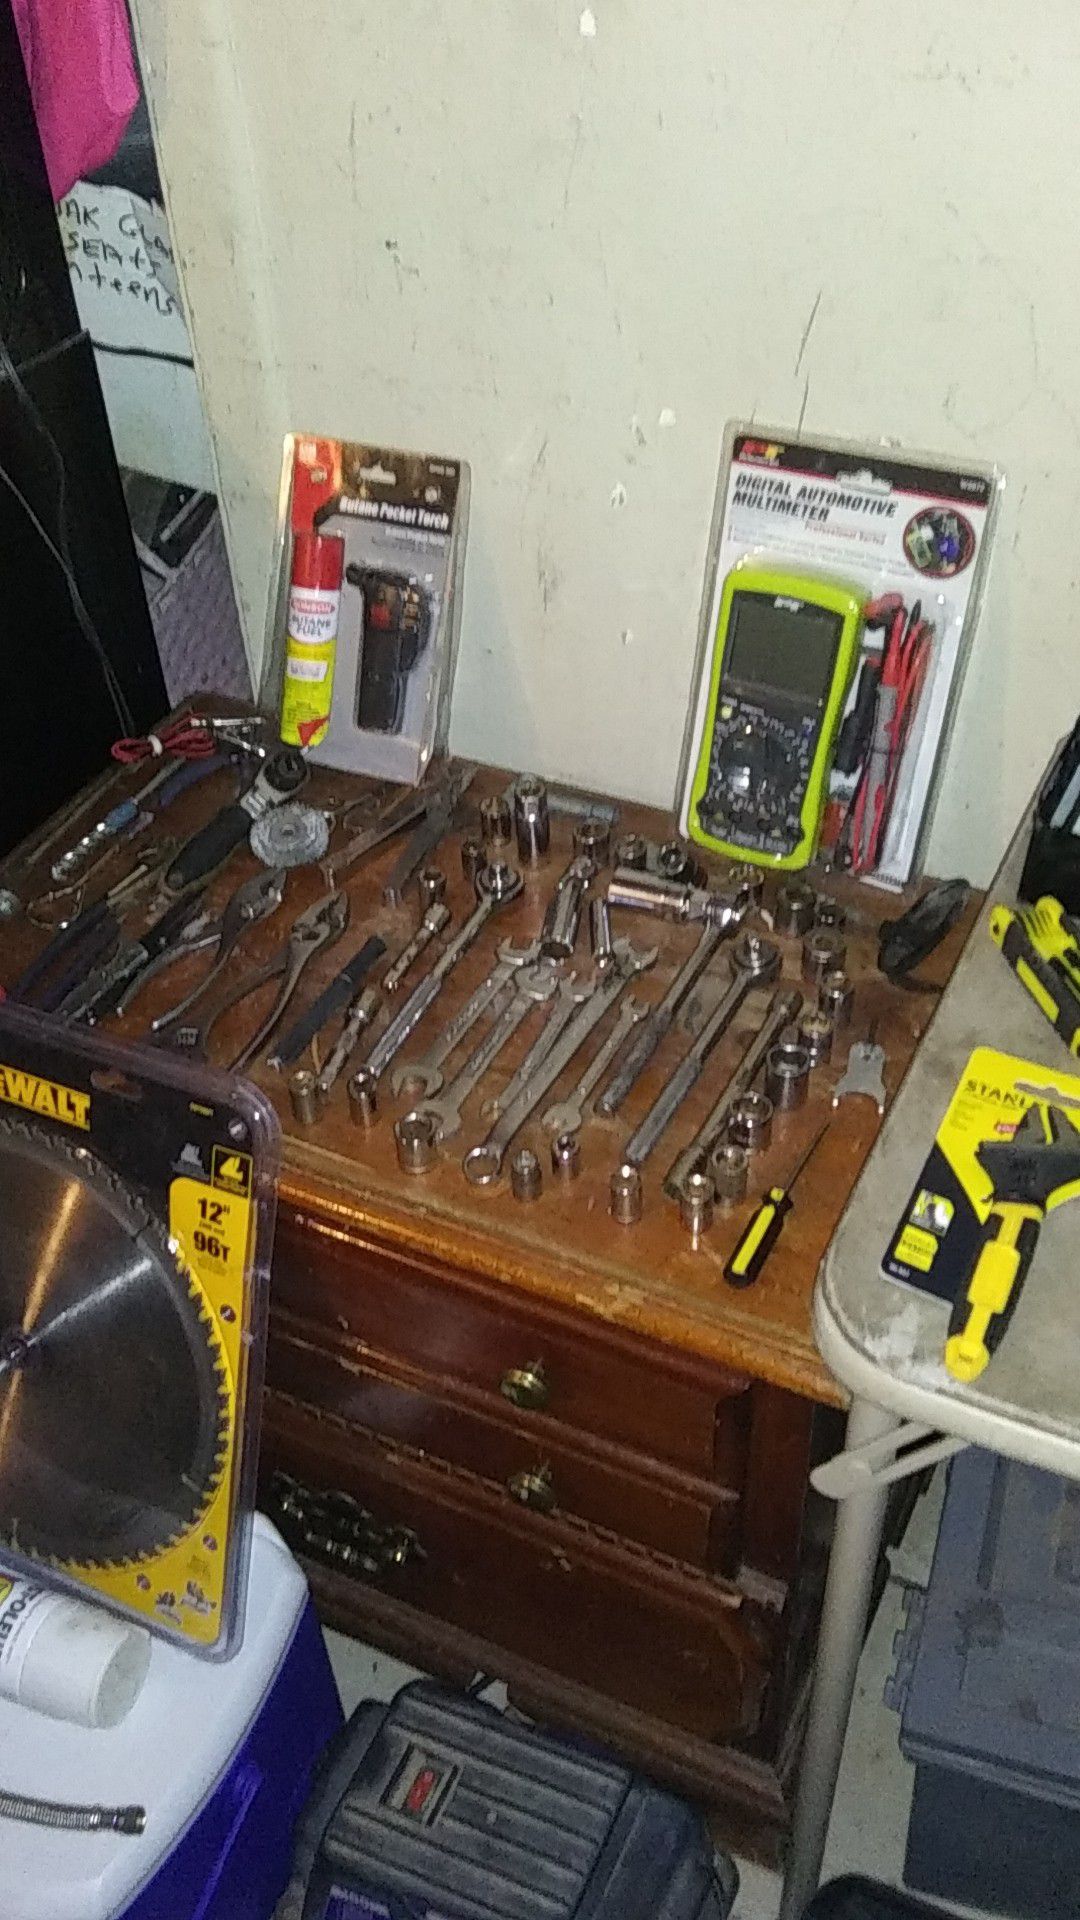 Tools......brand new multi reader in package. Torches propane. Set of drill bits.. Ratchets... Sockets..gauges...mcompressor..knew ice chest...